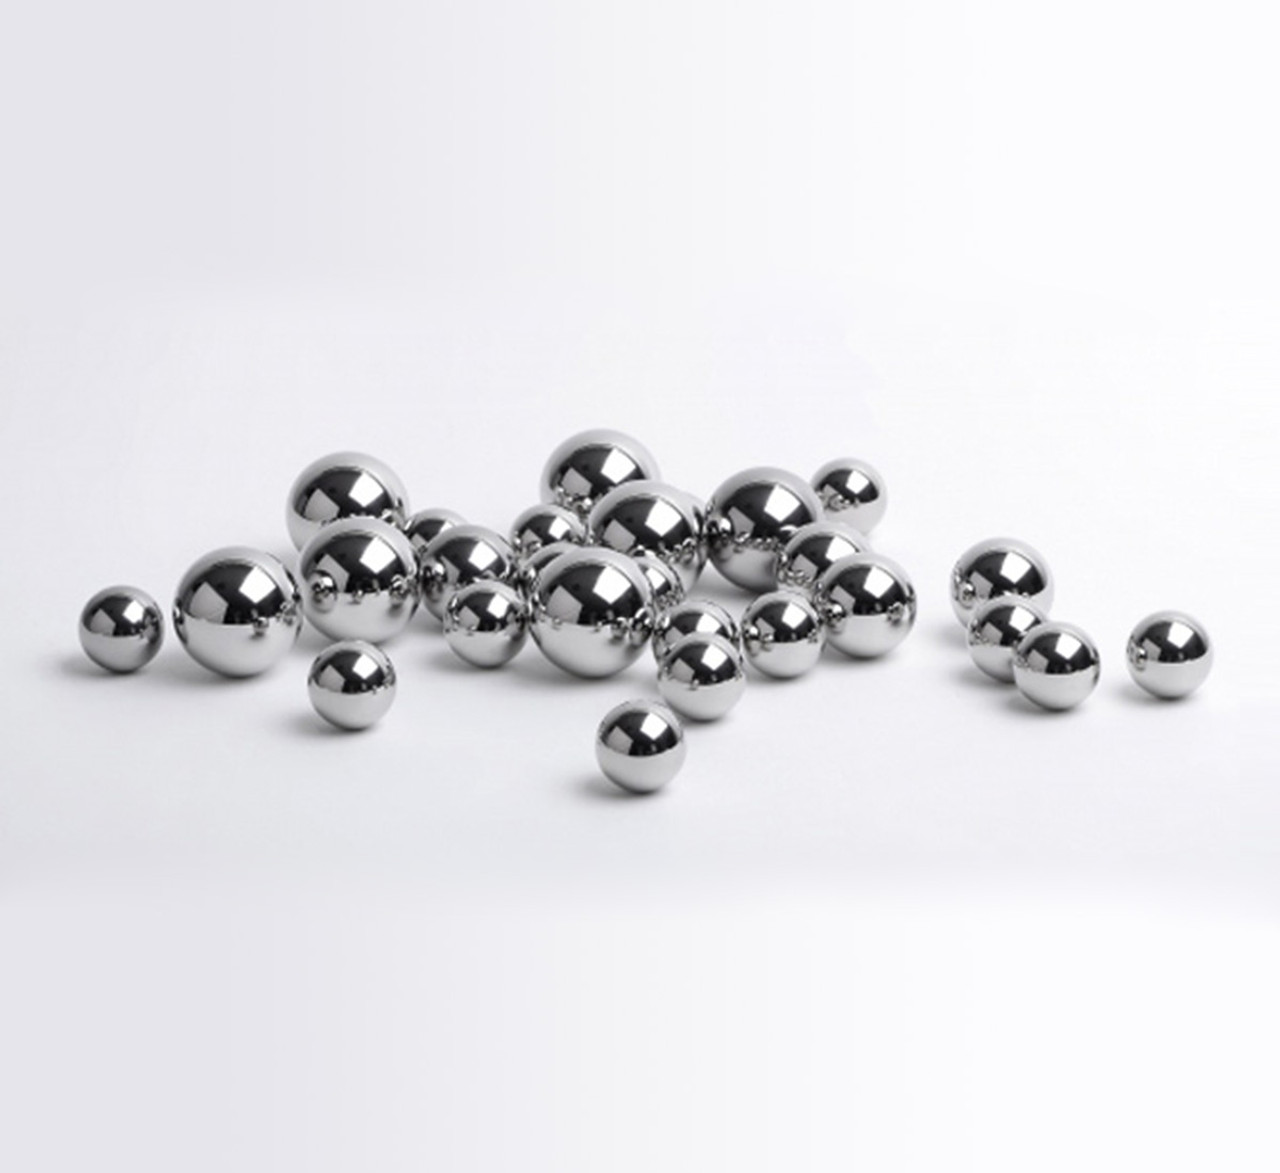 Rolling elements Ball 11.112 mm INOX AISI 420 - 1